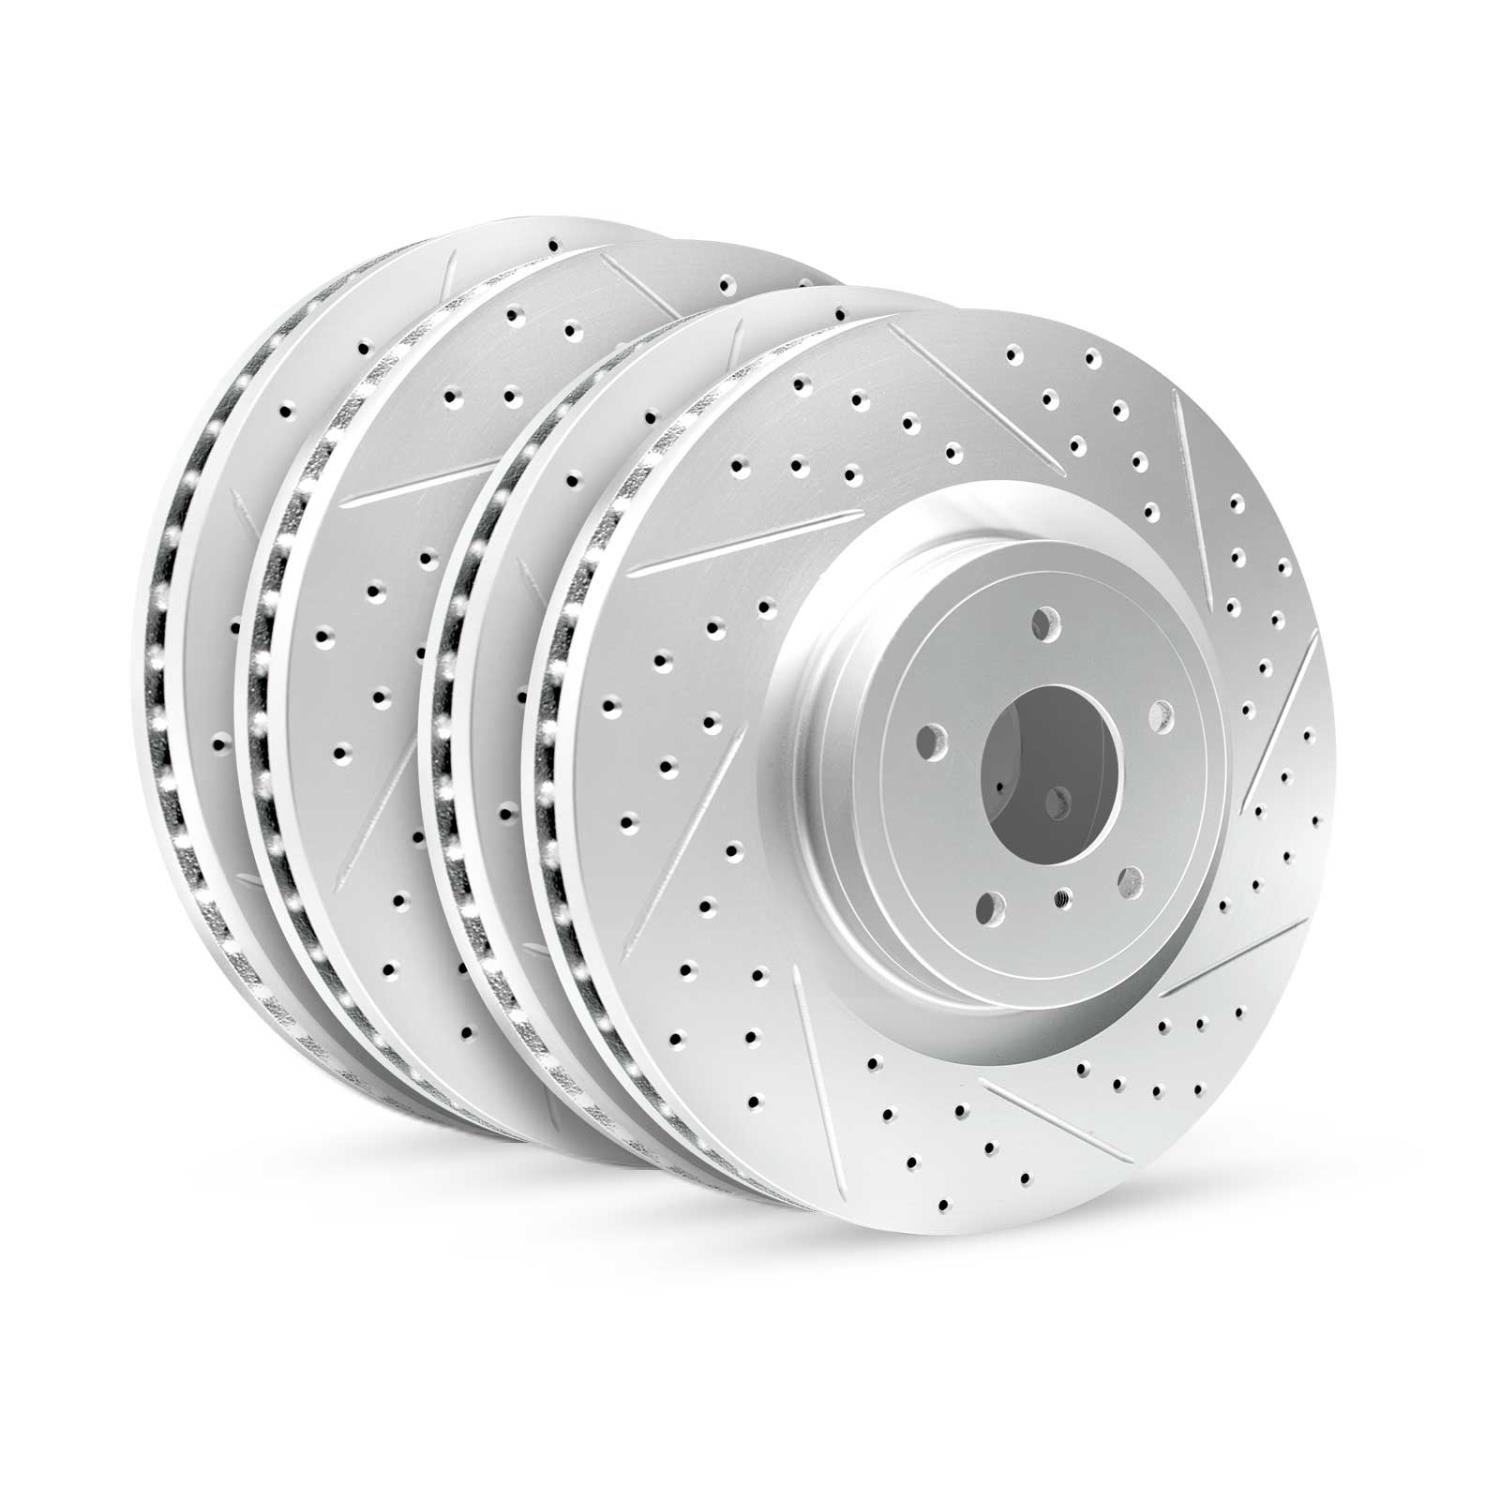 GEO-Carbon Drilled/Slotted Rotors, 2003-2006 Kia/Hyundai/Genesis, Position: Front/Rear